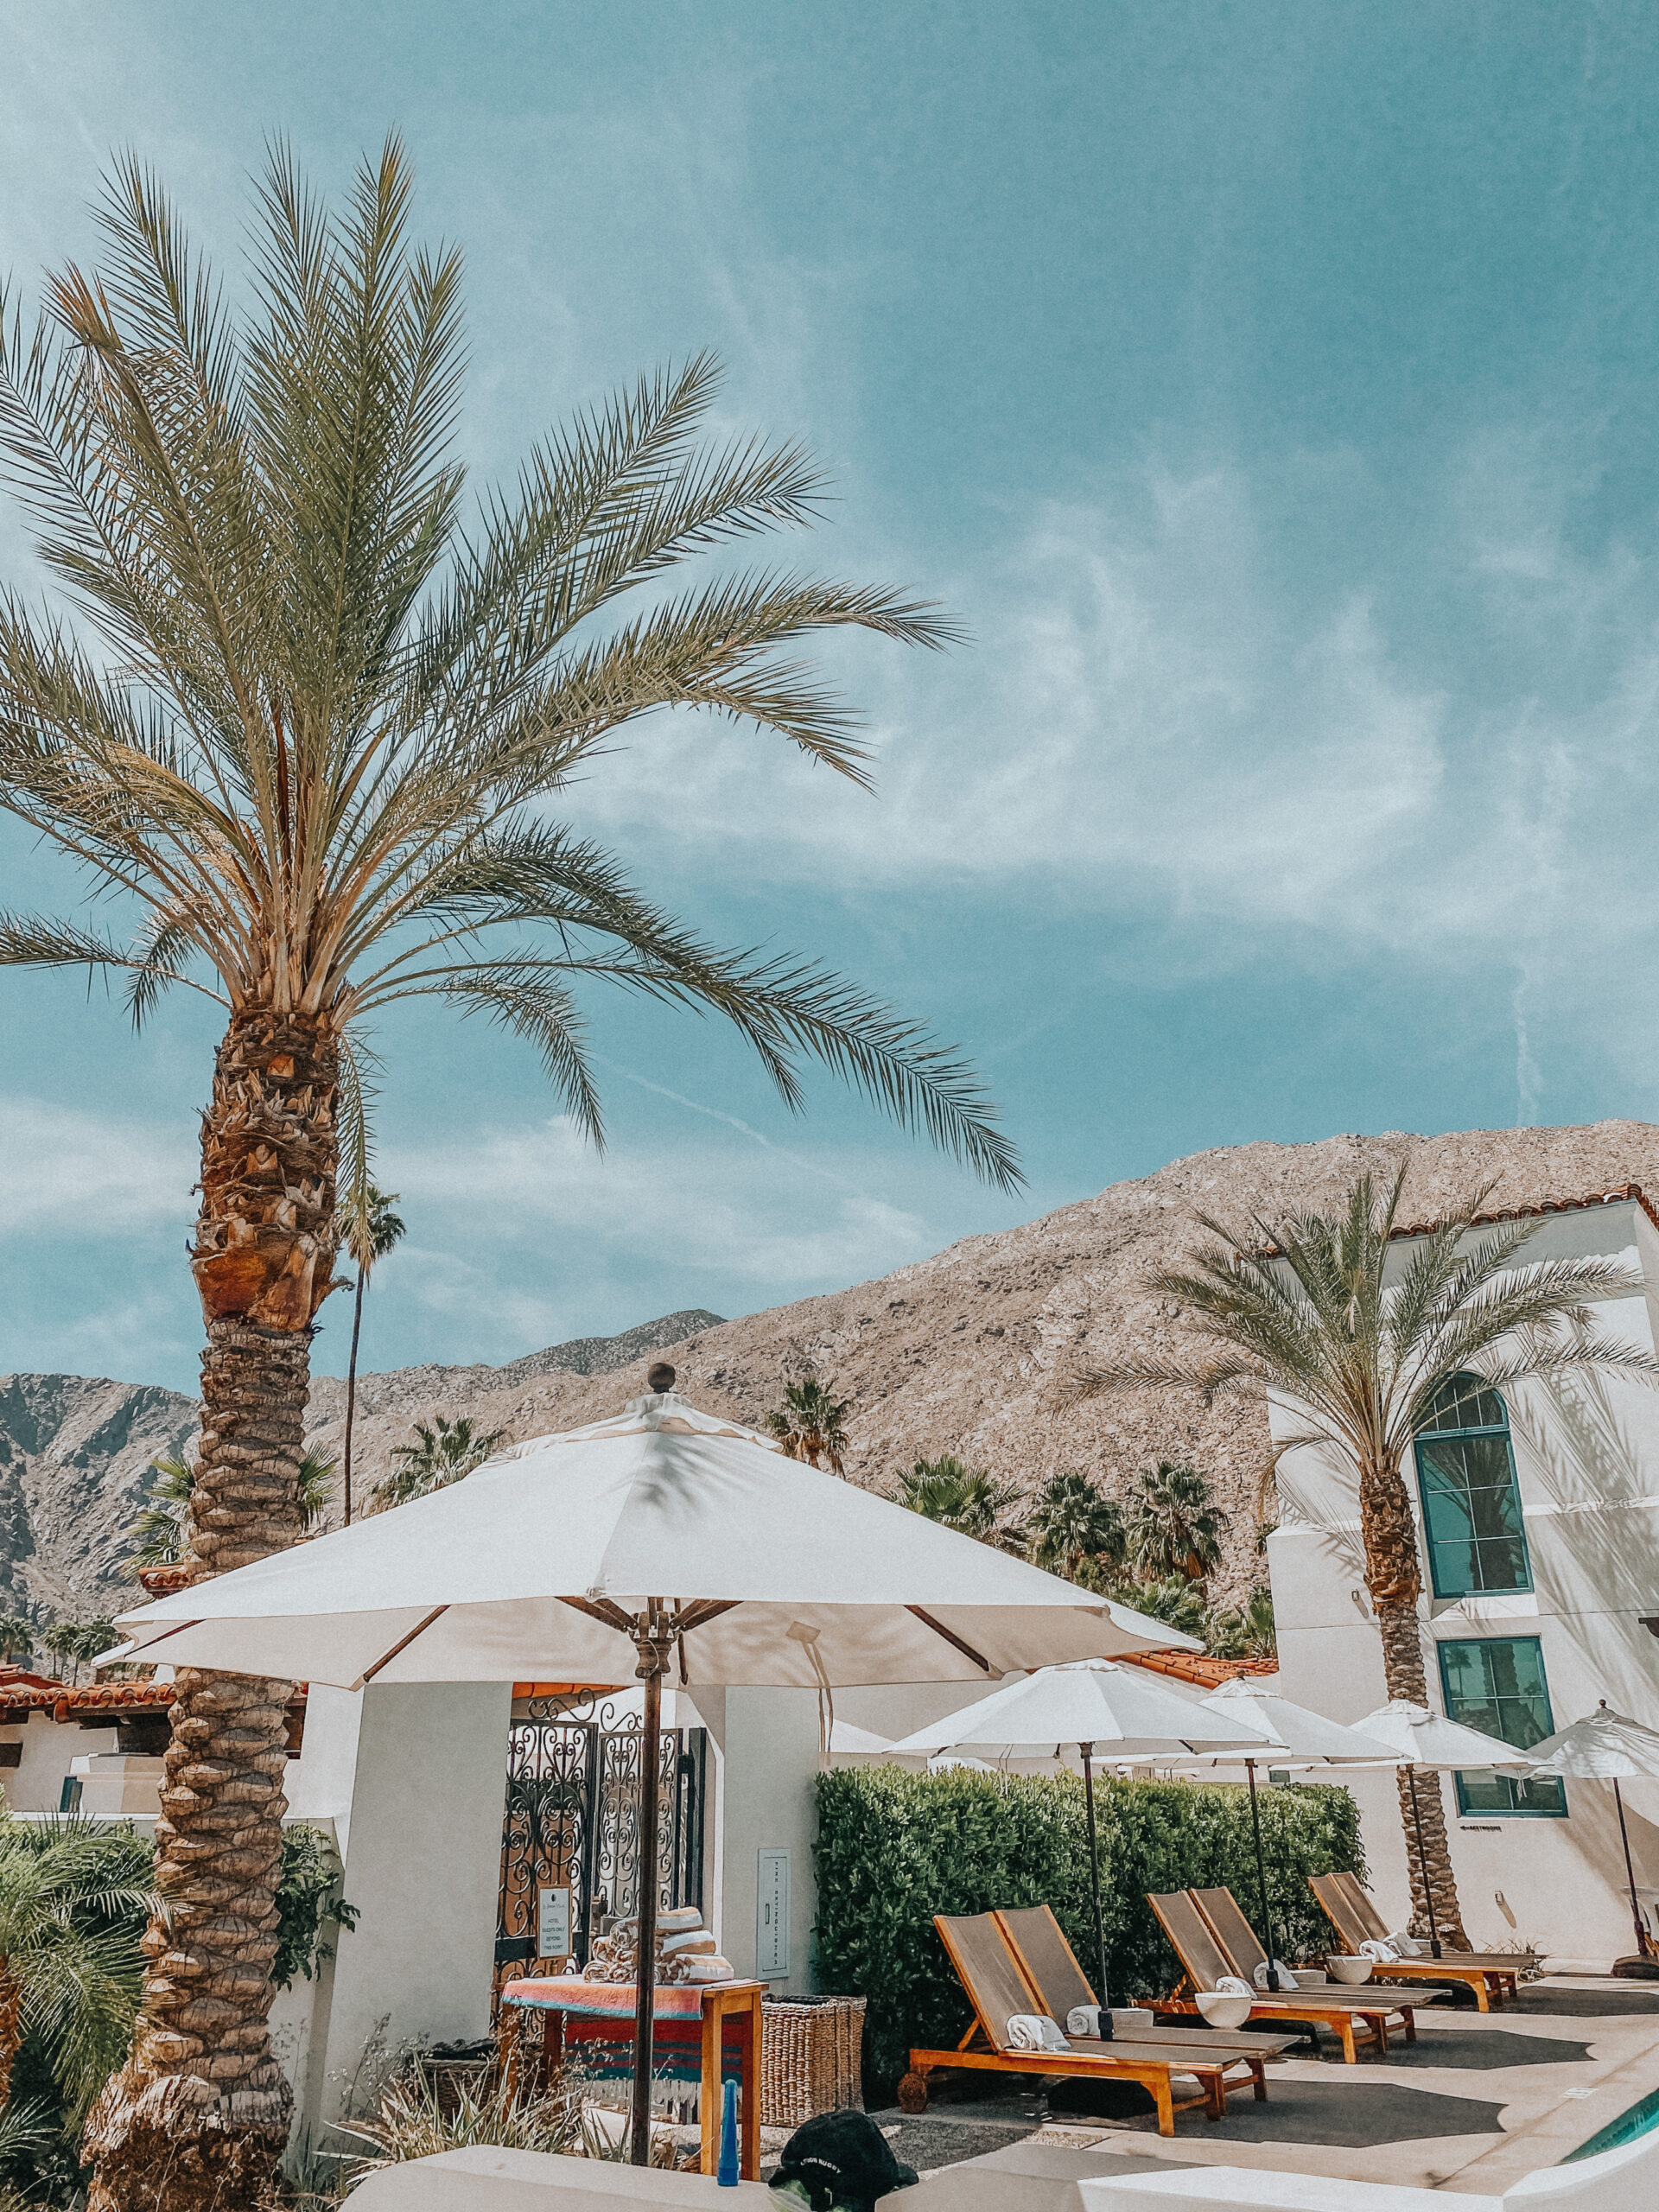 Hotels in Palm Springs, where to stay in Palm Springs - Palm Trees and Pellegrino California travel blog